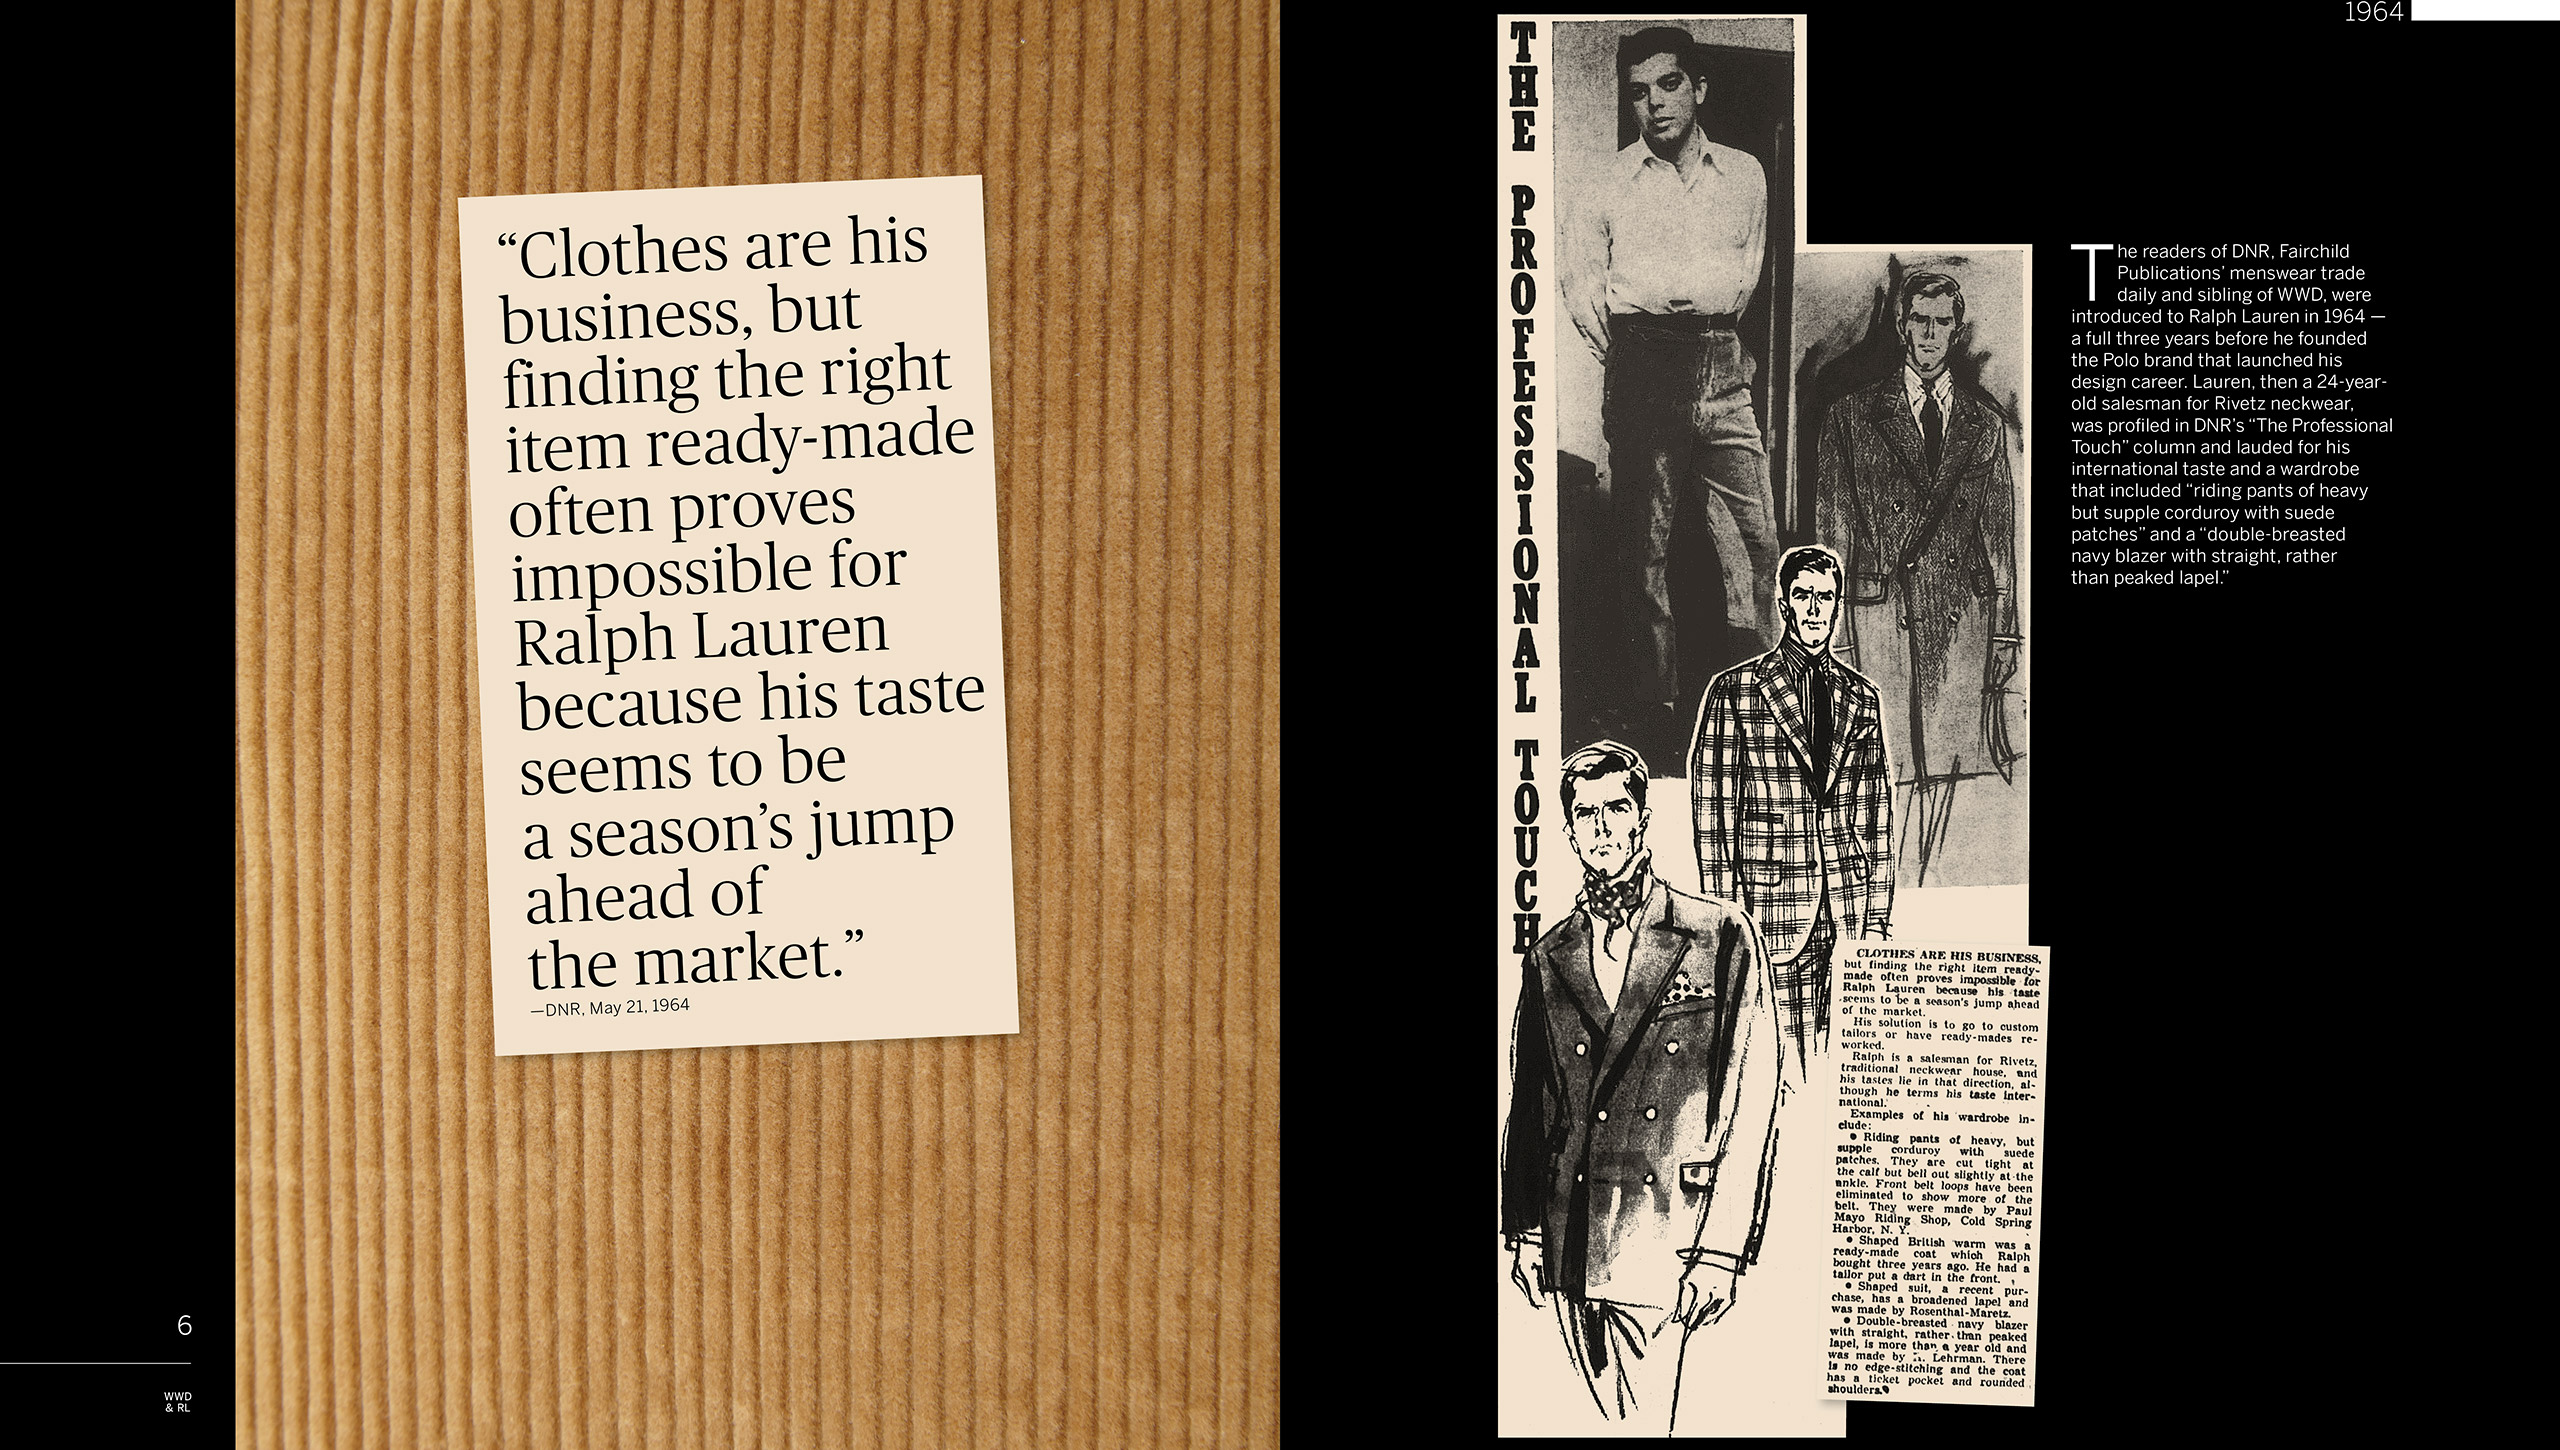 1964: Menswear daily <em>DNR</em> profiles a young tie salesman with the neckwear manufacturer Rivetz in their column &#x201C;The Professional Touch.&#x201D; The article states that the 24-year-old named Ralph Lauren is becoming known for his bold sartorial choices, including &#x201C;riding pants of heavy but supple corduroy with suede patches&#x201D; and a &#x201C;double-breasted navy blazer with straight, rather than peaked lapel.&#x201D; It further notes the difficulty young Mr. Lauren has in finding ready-made clothes because &#x201C;his taste seems to be a season&#x2019;s jump ahead of the market.&#x201D;